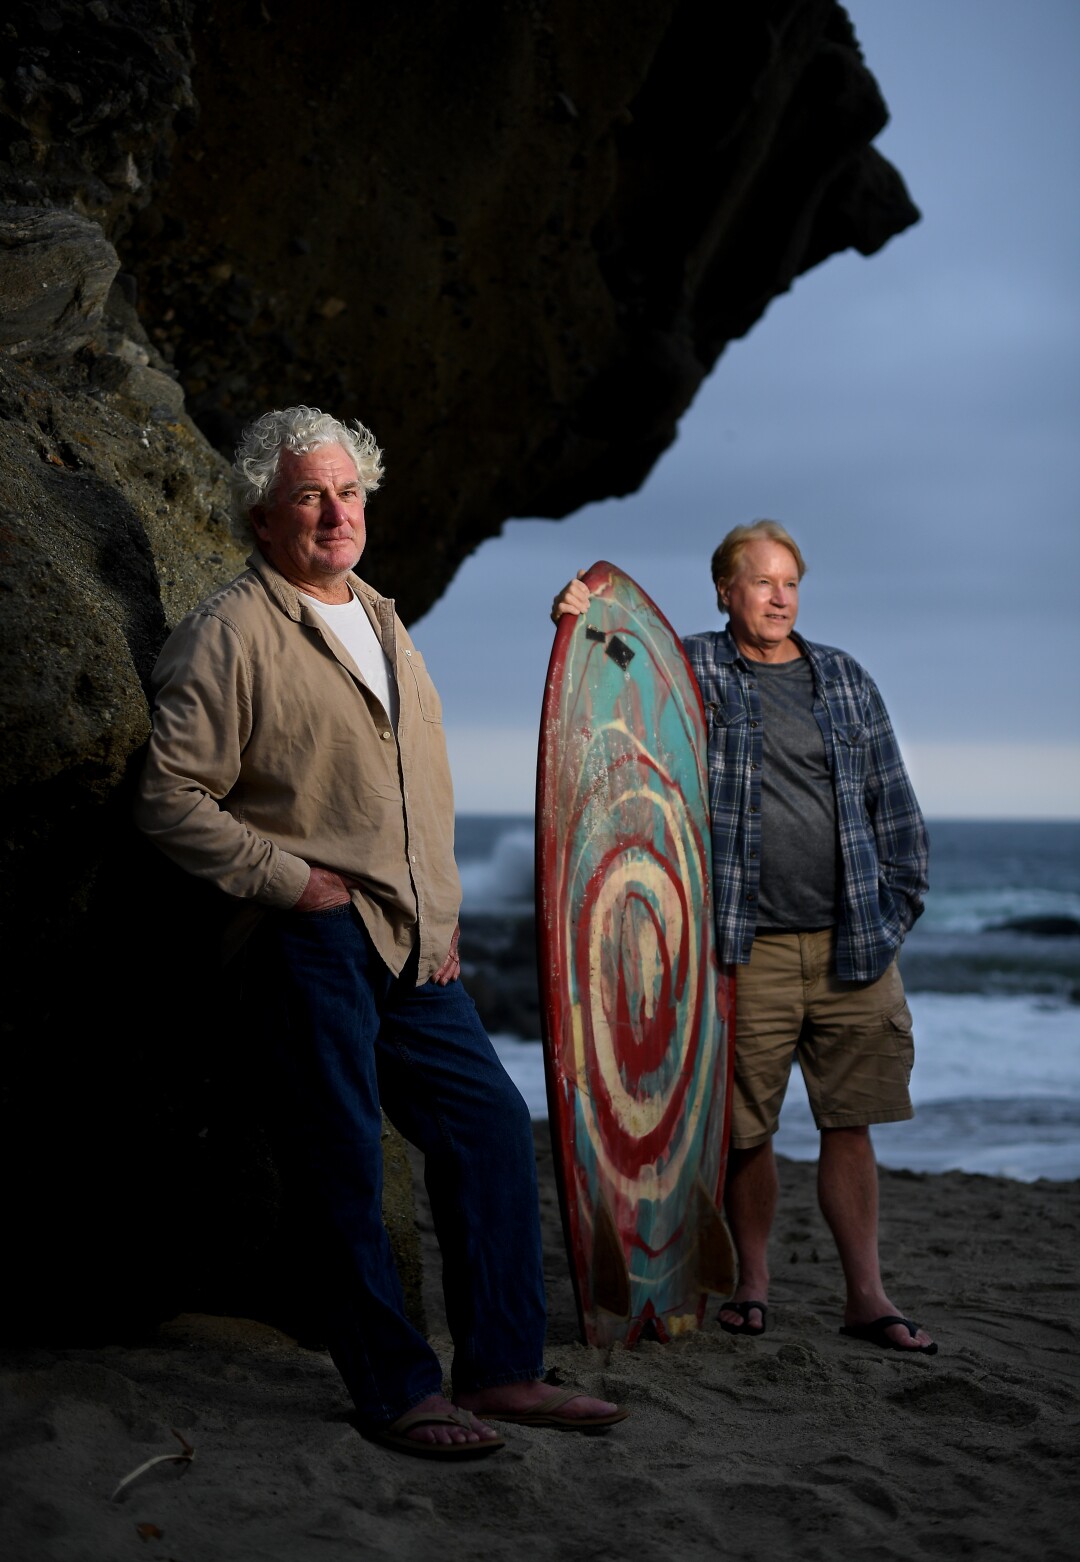  Surfers Kevin Naughton, left, and photographer Craig Peterson